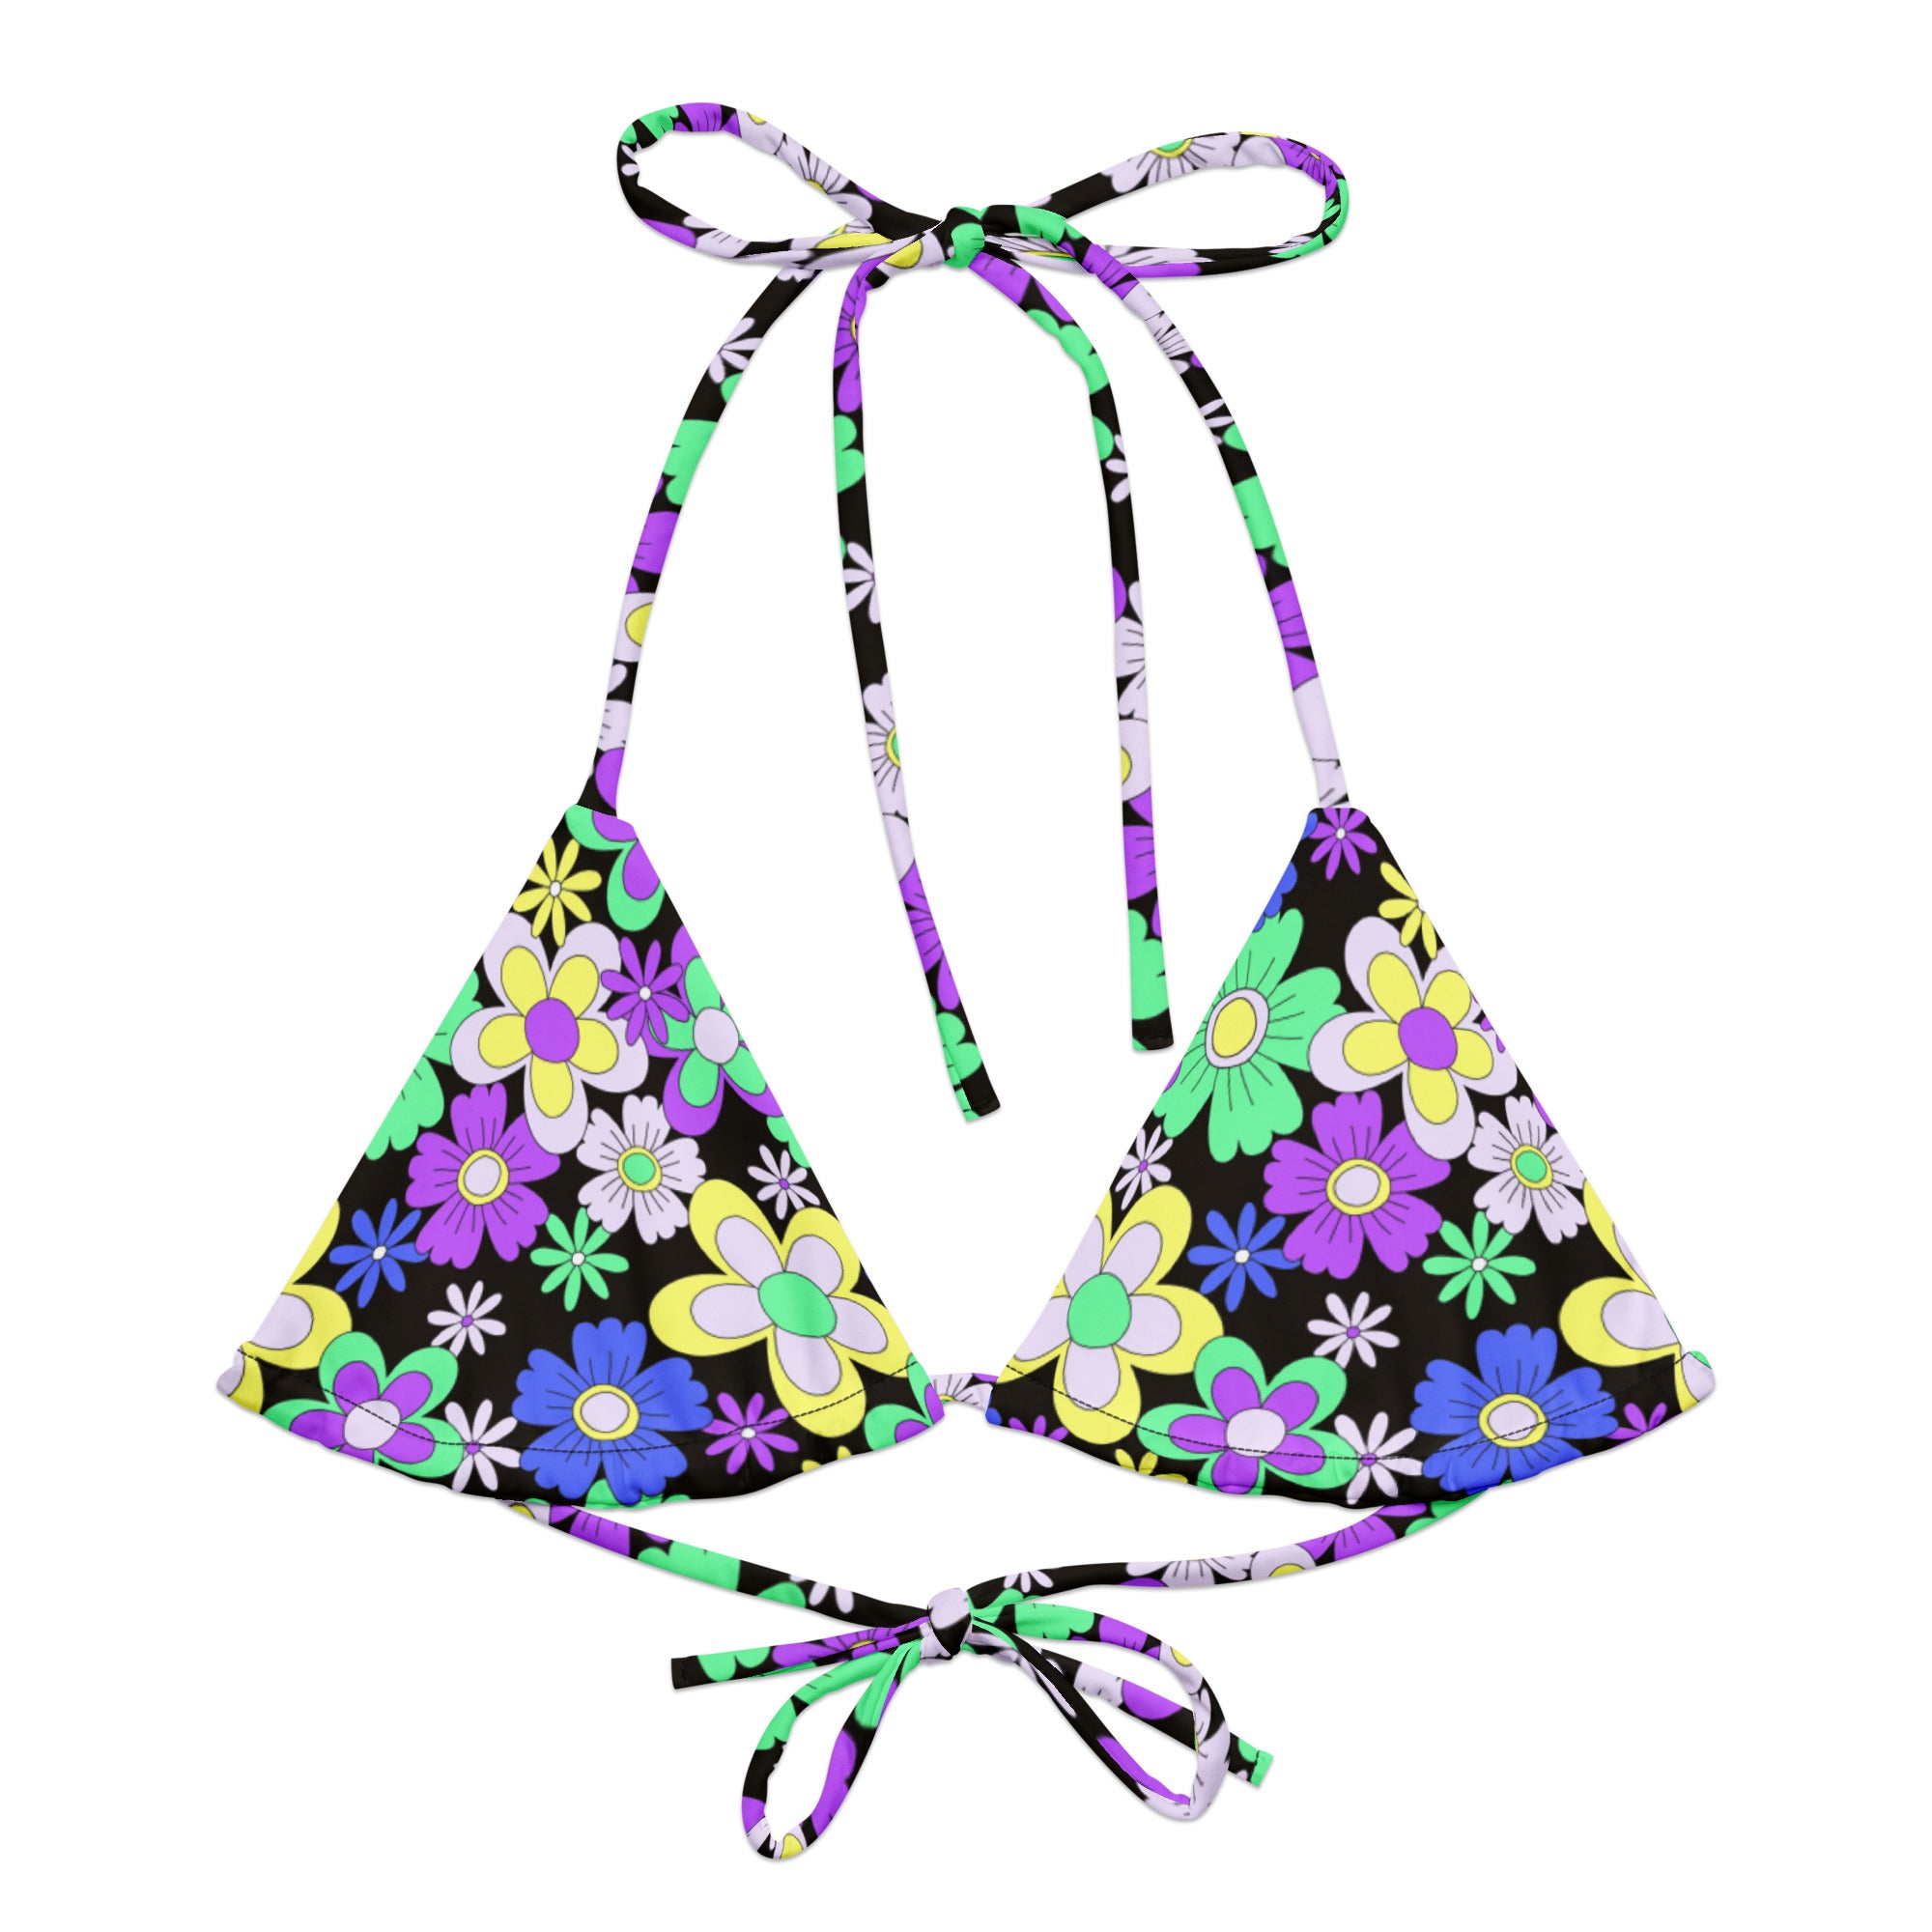 Jedi Flip Recycled Triangle Top - Rave Top - Festival Top